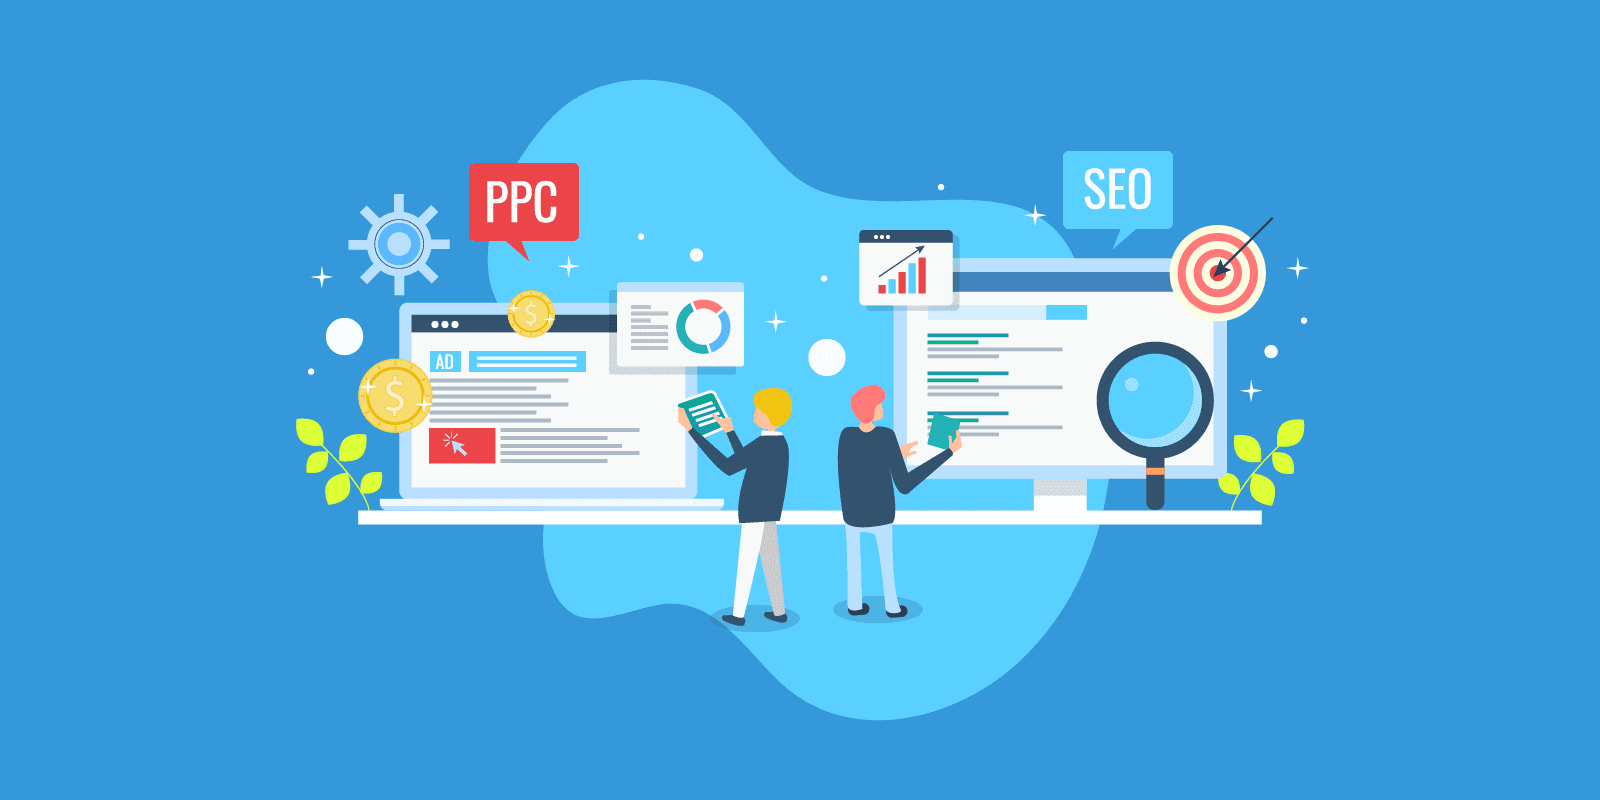 Why You Should Use Both SEO and PPC to Dominate Search